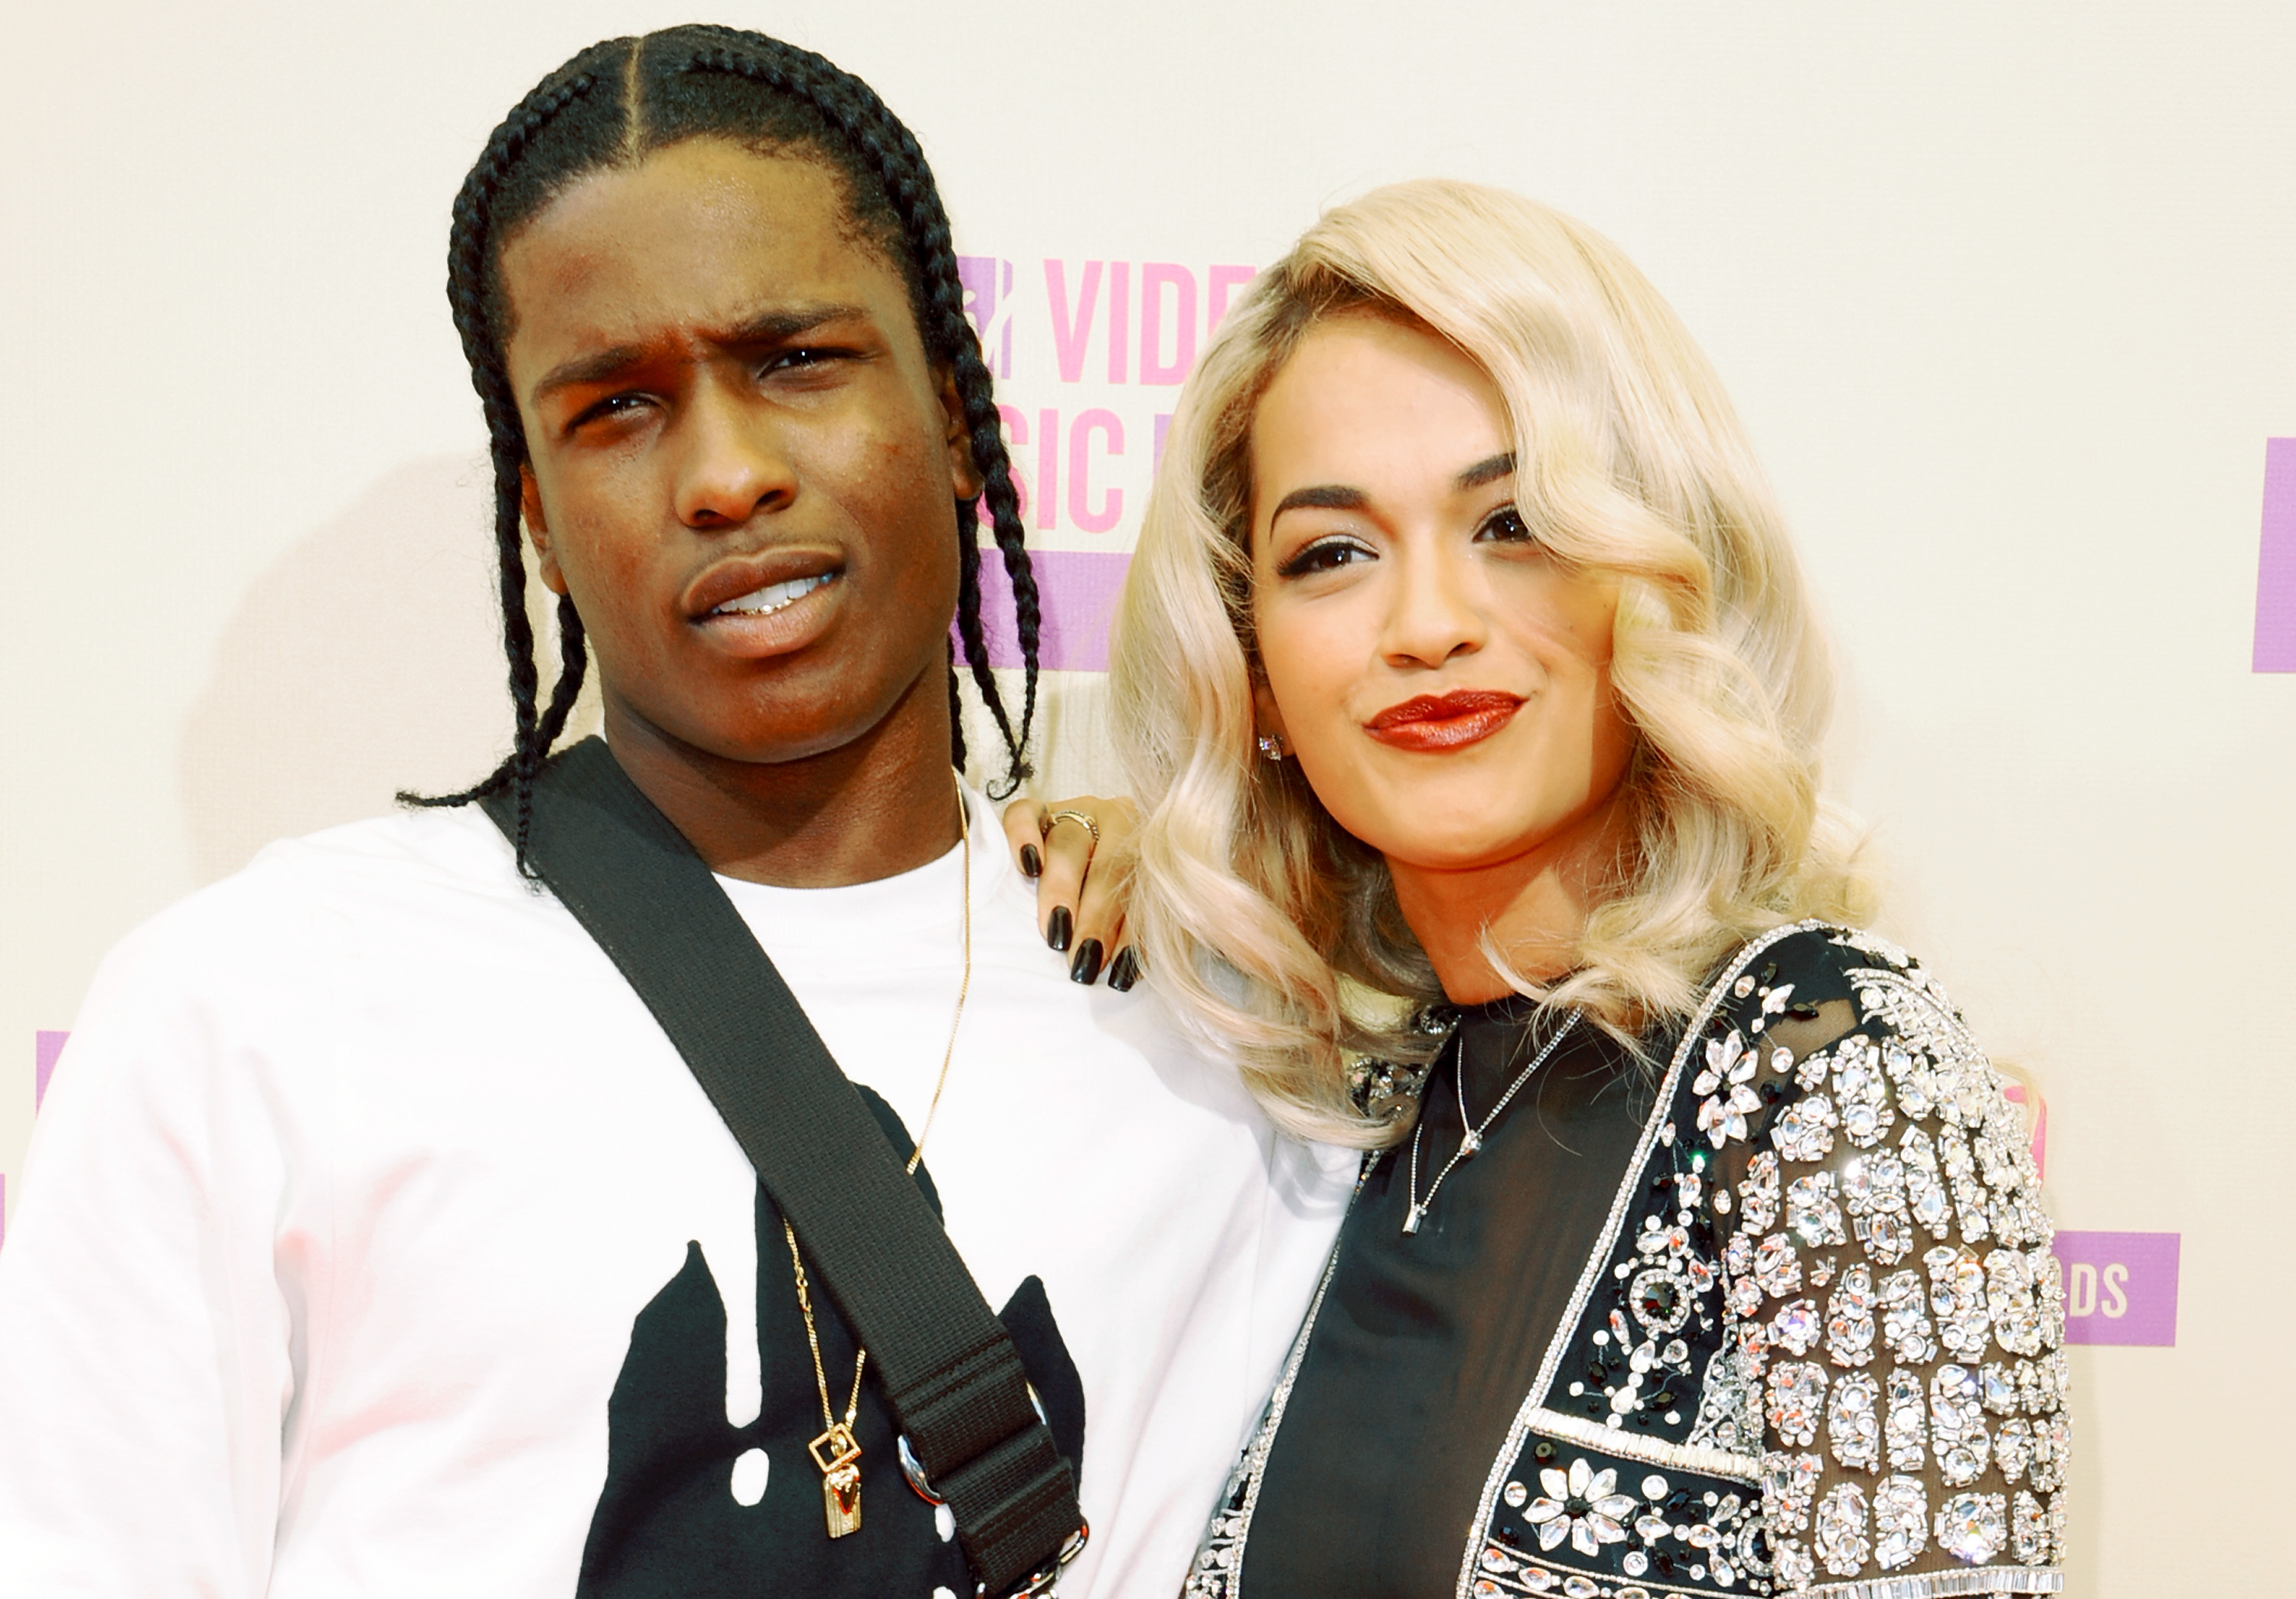 Rapper A$AP Rocky and singer Rita Ora arrive at the 2012 MTV Video Music Awards